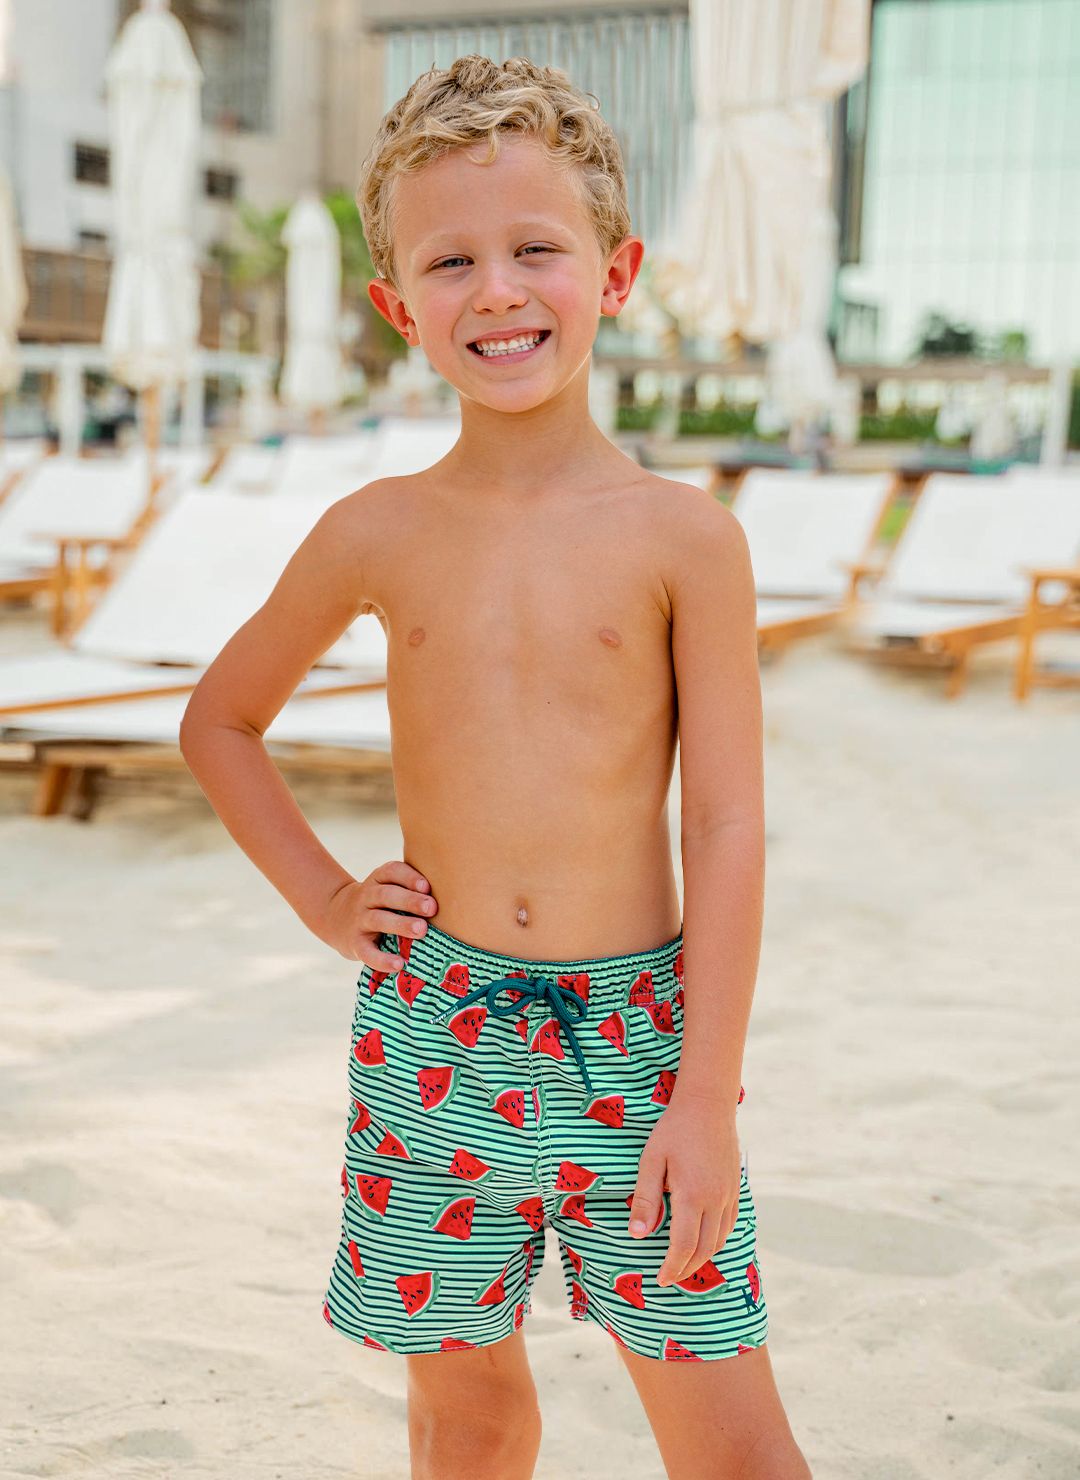 The Jack are essential CAHA CAPO boardshorts in Watermelon. Part of the CAHA CAPO boy's swimwear collection.